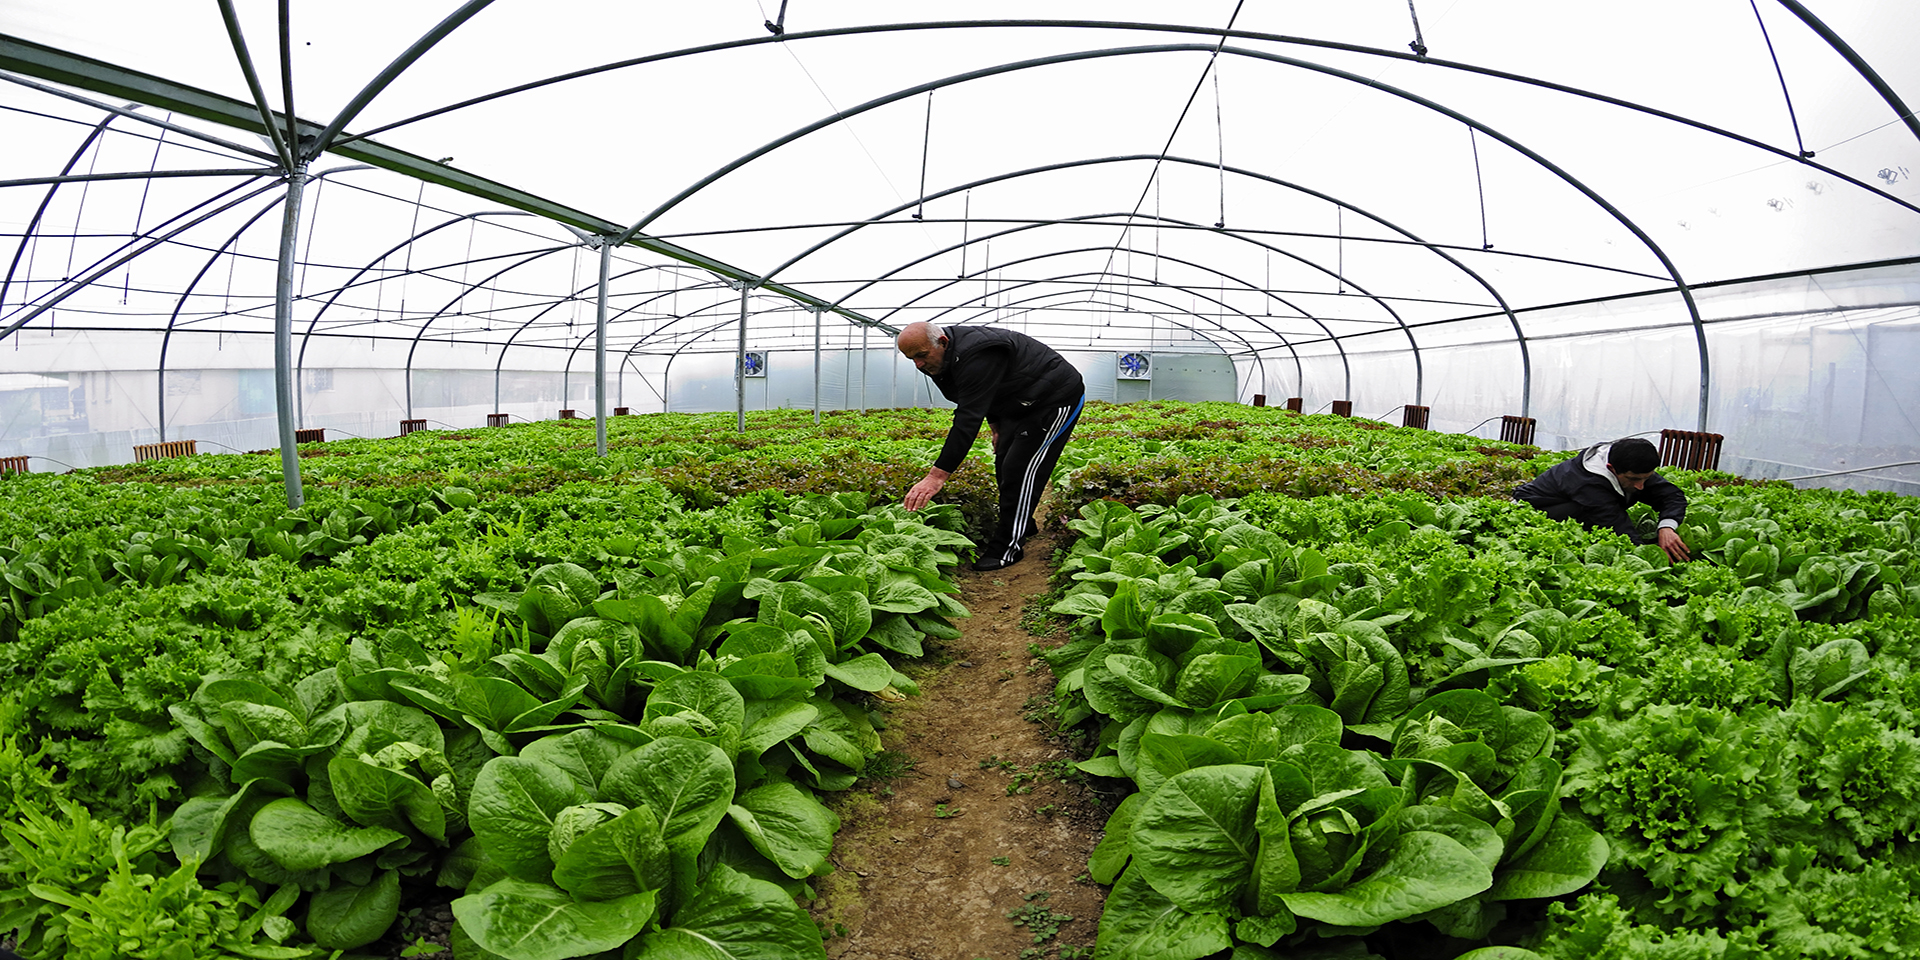 Two men inspecting bright green lettuce and cabbage within a greenhouse.